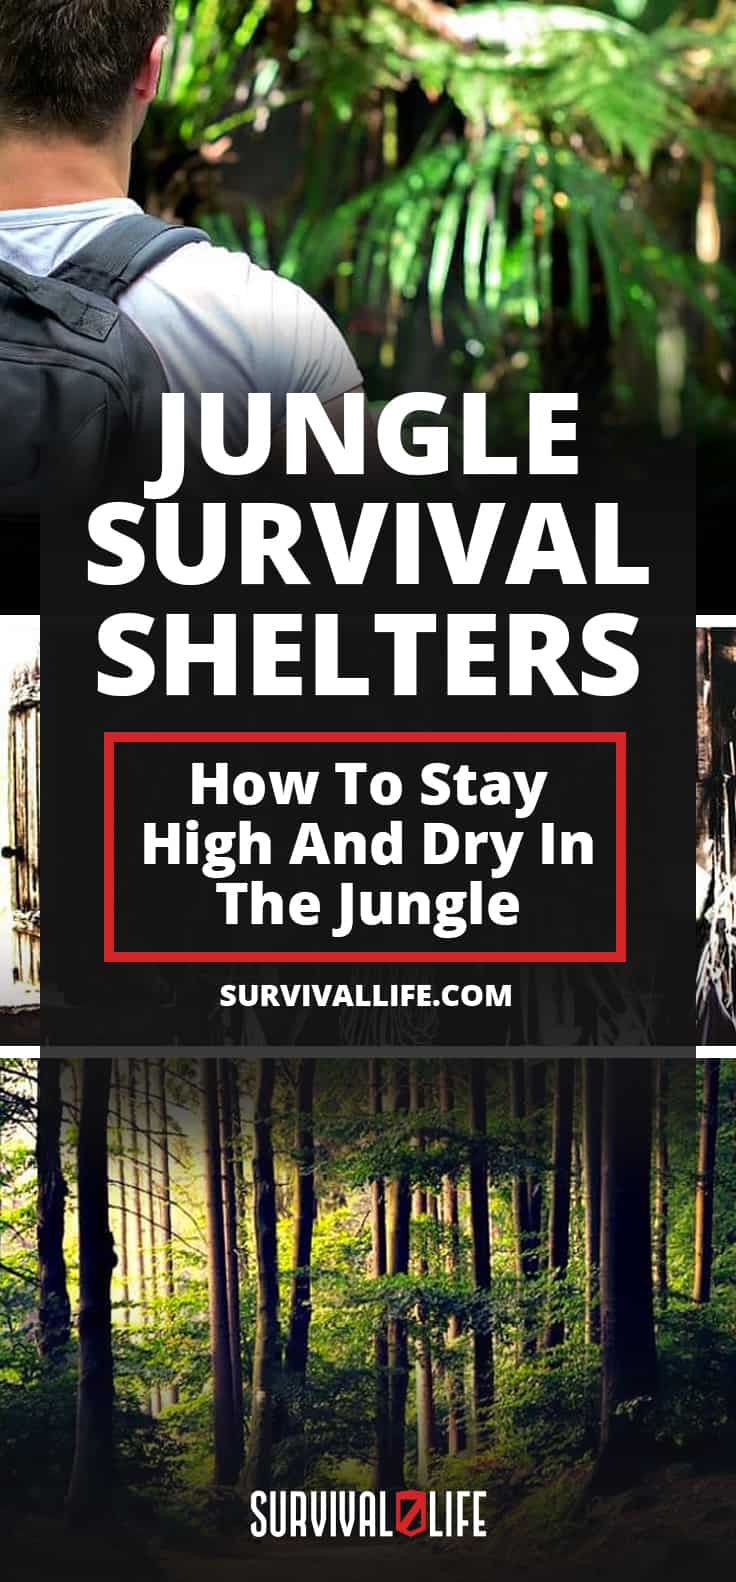 Jungle Survival Shelters | How To Stay High And Dry In The Jungle